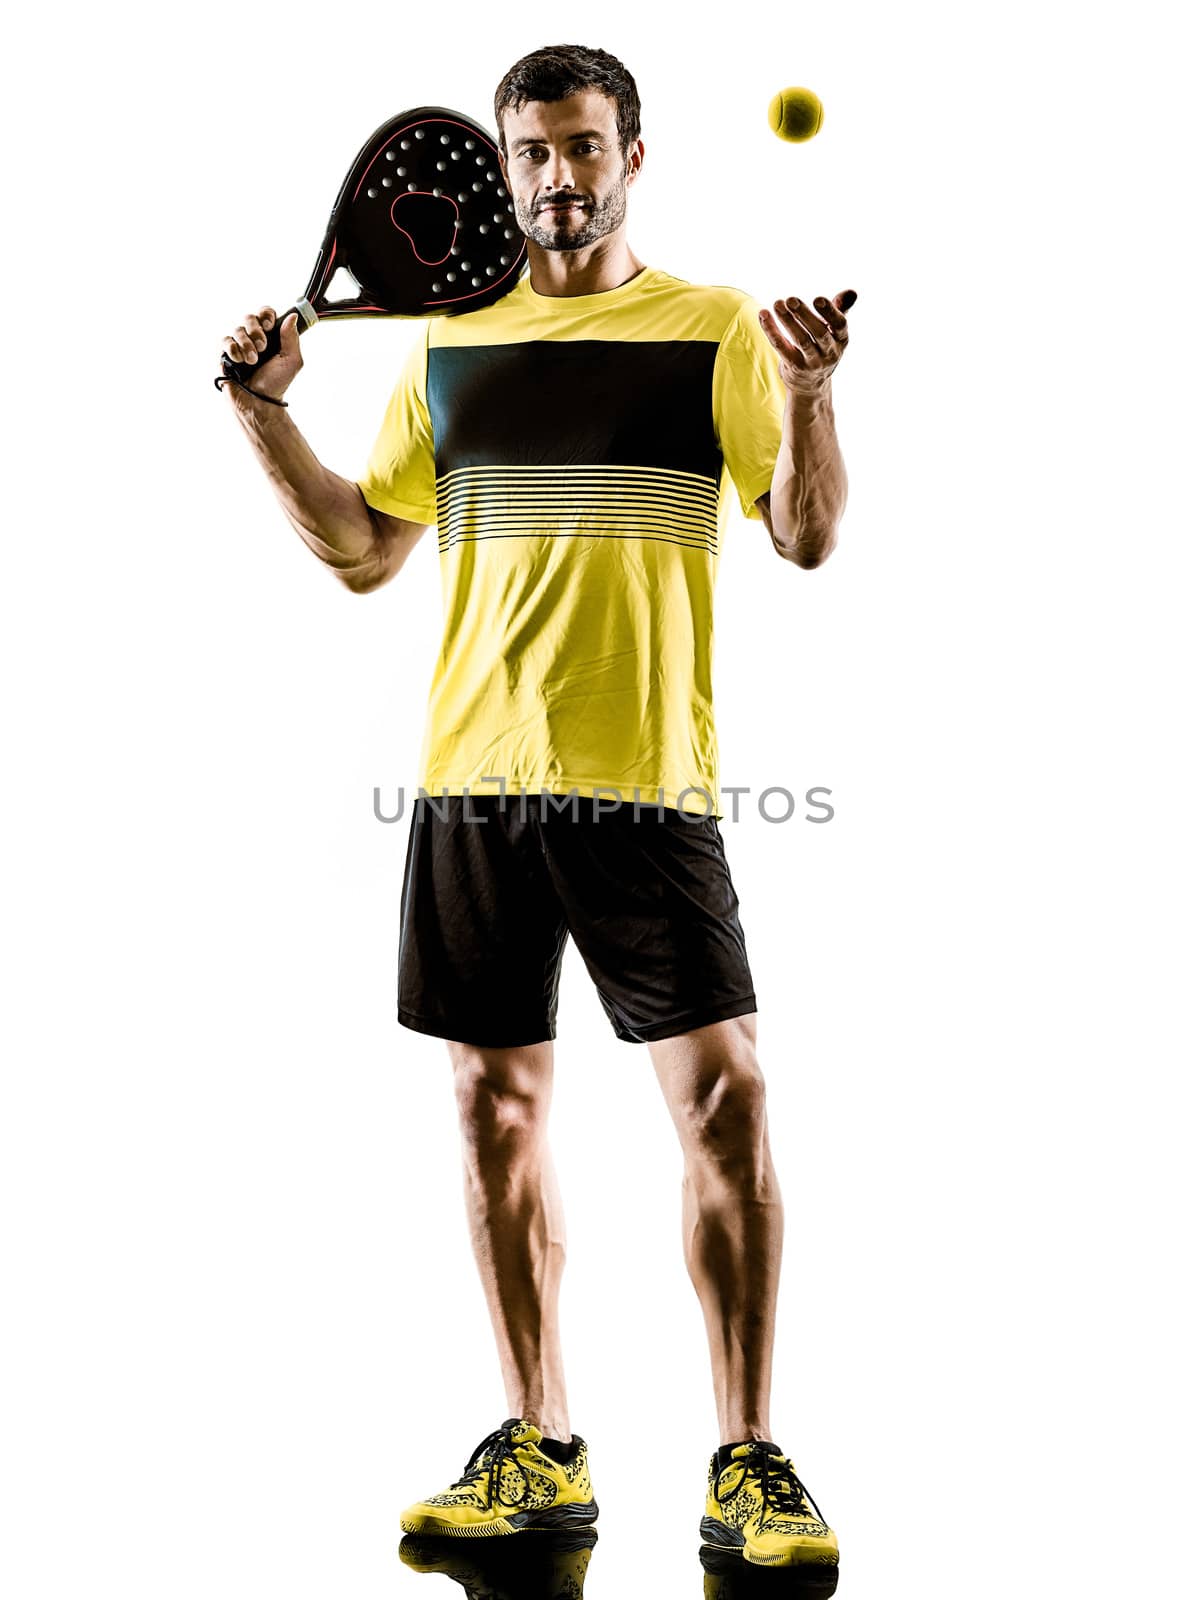 Paddle tennis player man isolated white background by PIXSTILL